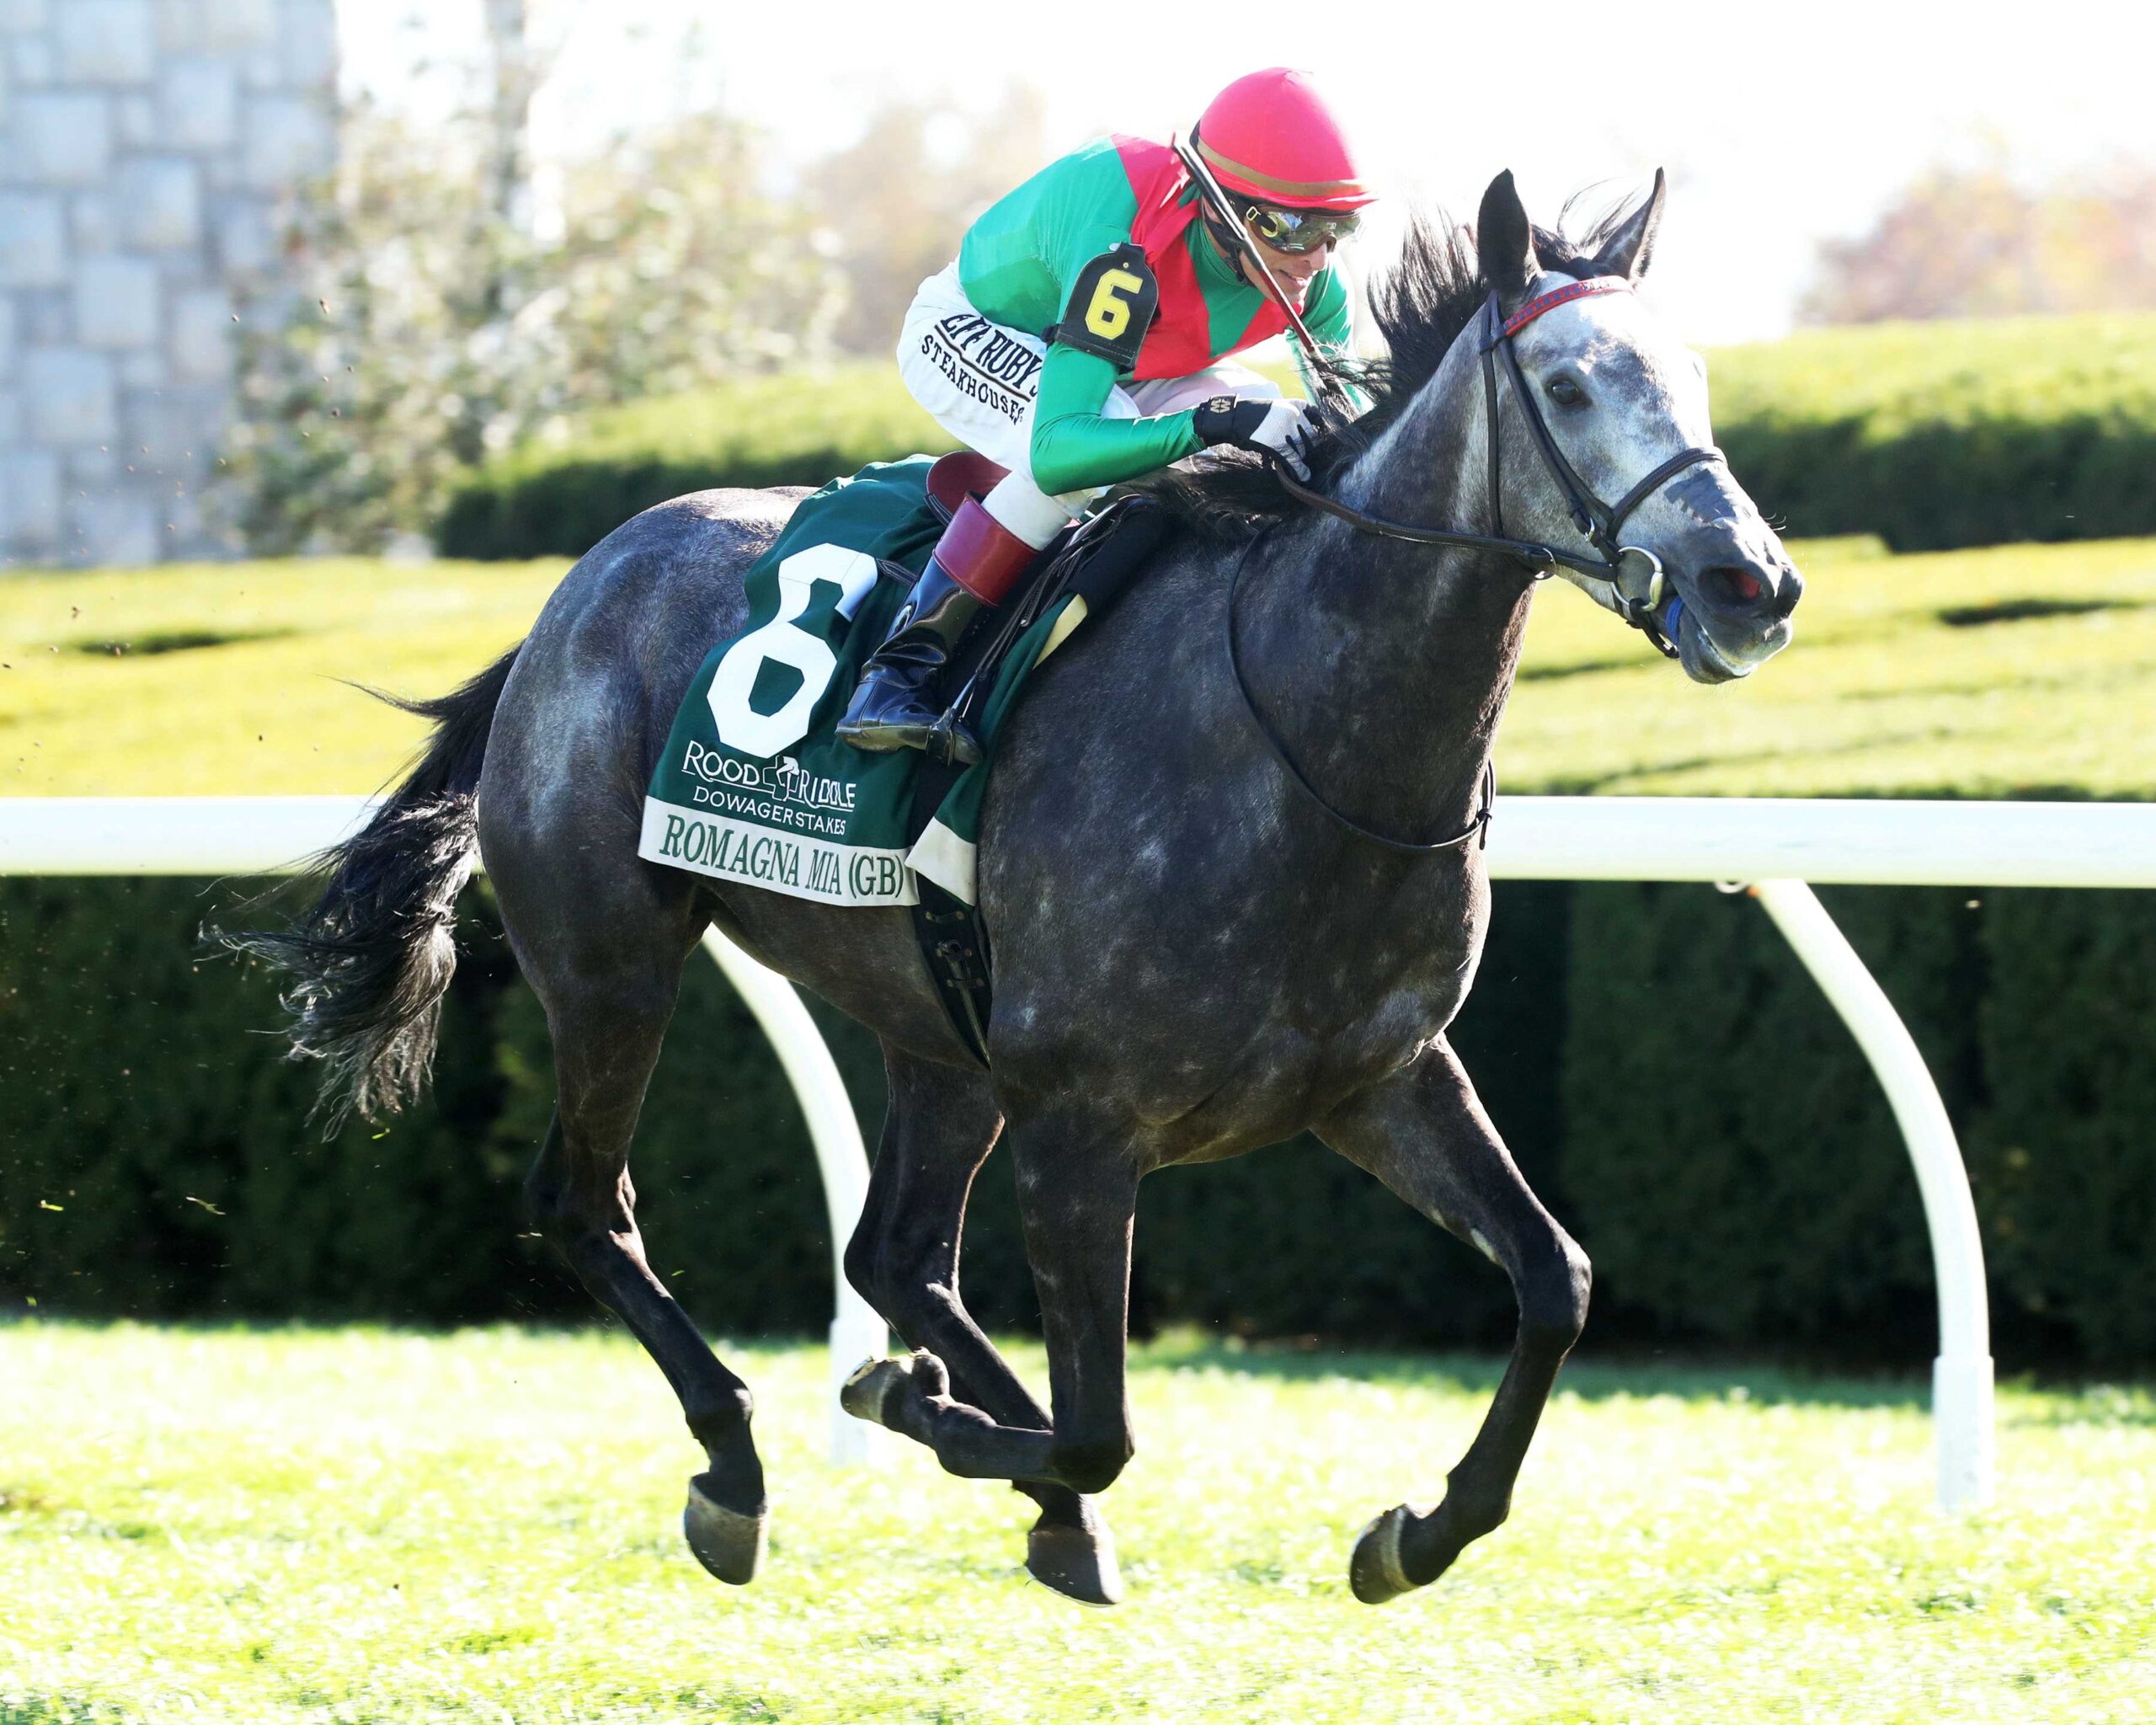 Romagna Mía, horse, Team Valor International , Rood and Riddle Dowager Stakes, domingo, 23 de octubre de 2023, Keeneland. Foto: Coady Photography